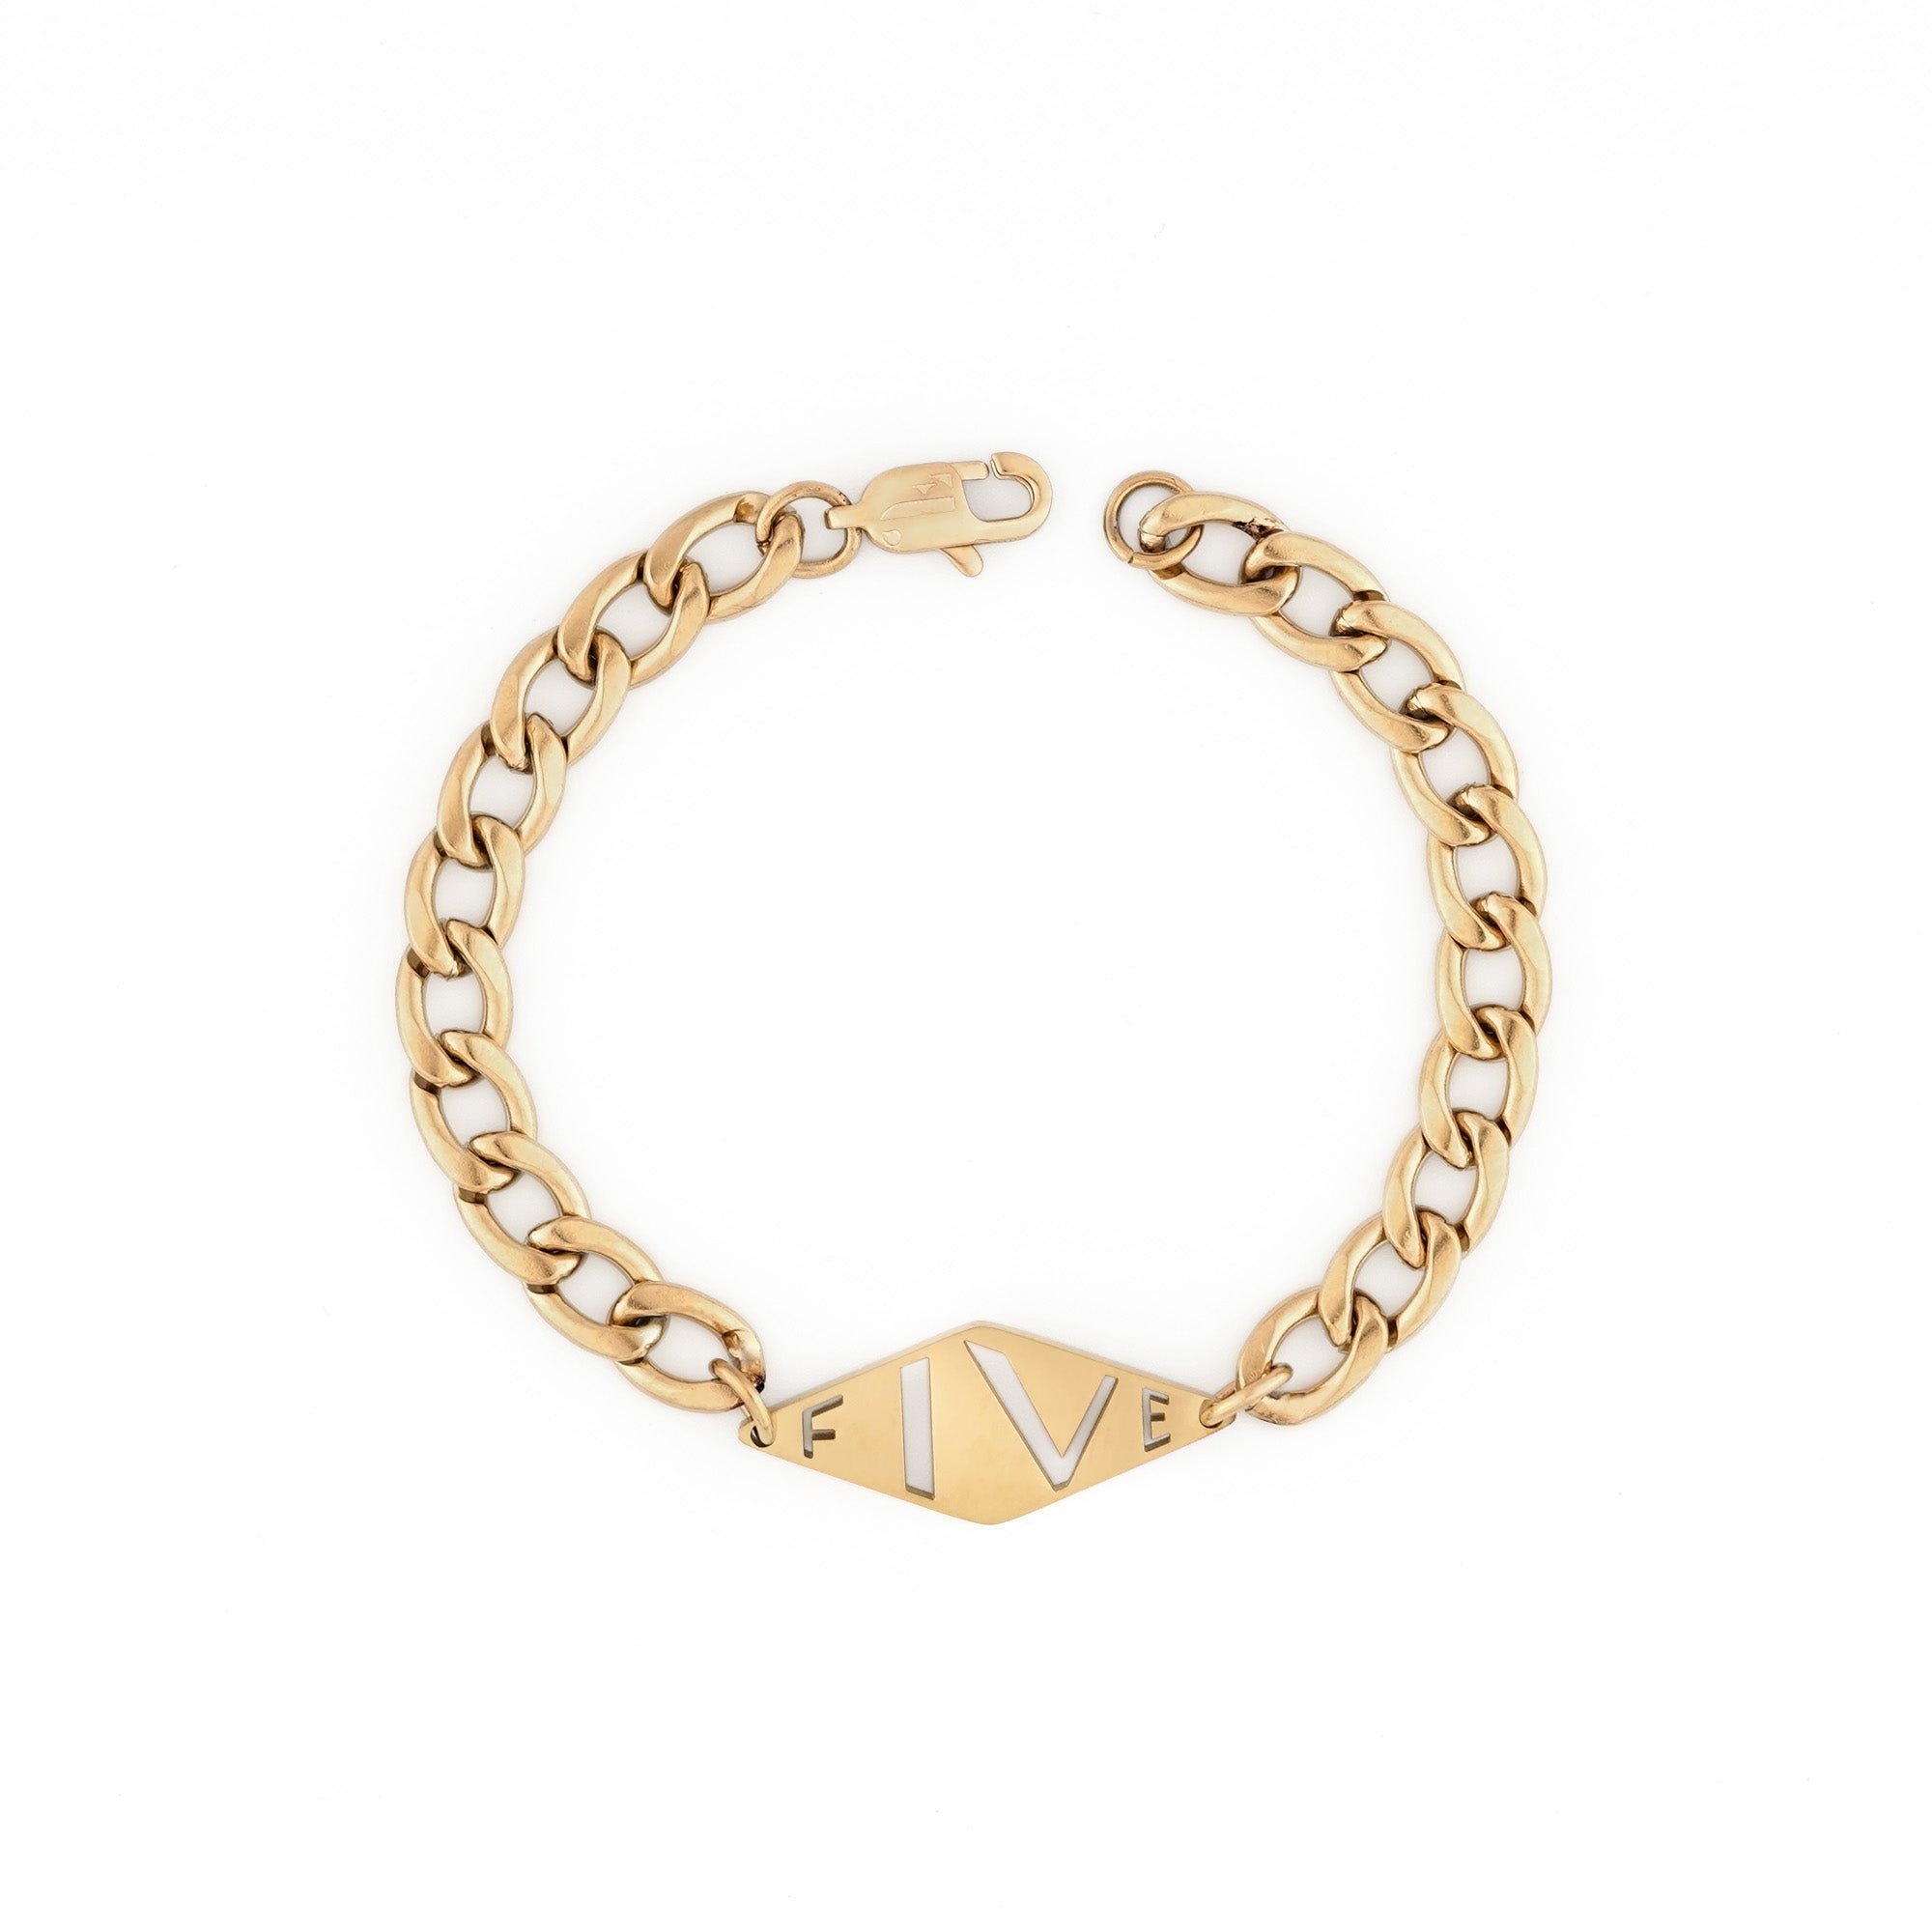 Dal bracelet by Five Jwlry for men, uniquely designed in Montreal, showcasing a wide woven Cuban link chain in 14k gold color, adorned with the brand's signature lozenge logo tag